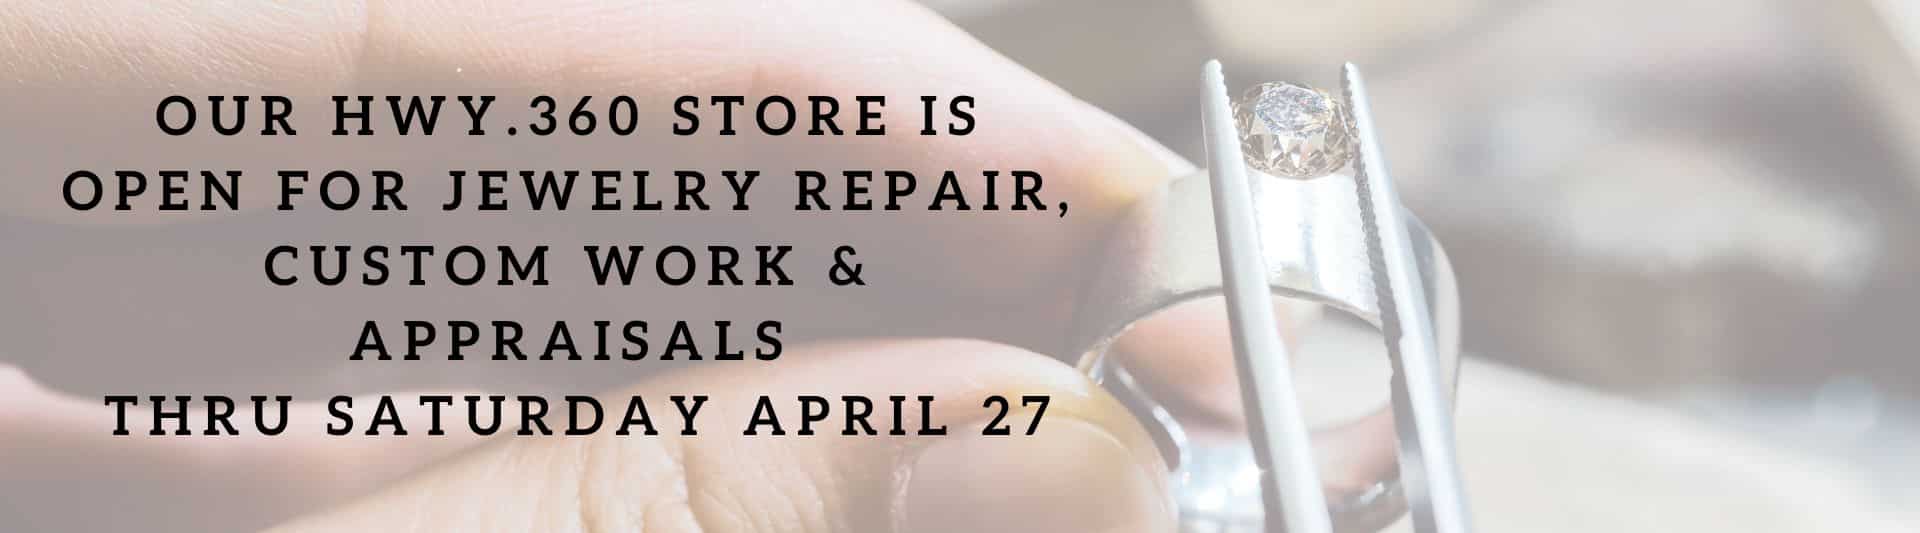 store is open for jewelry repair, custom work, and appraisals